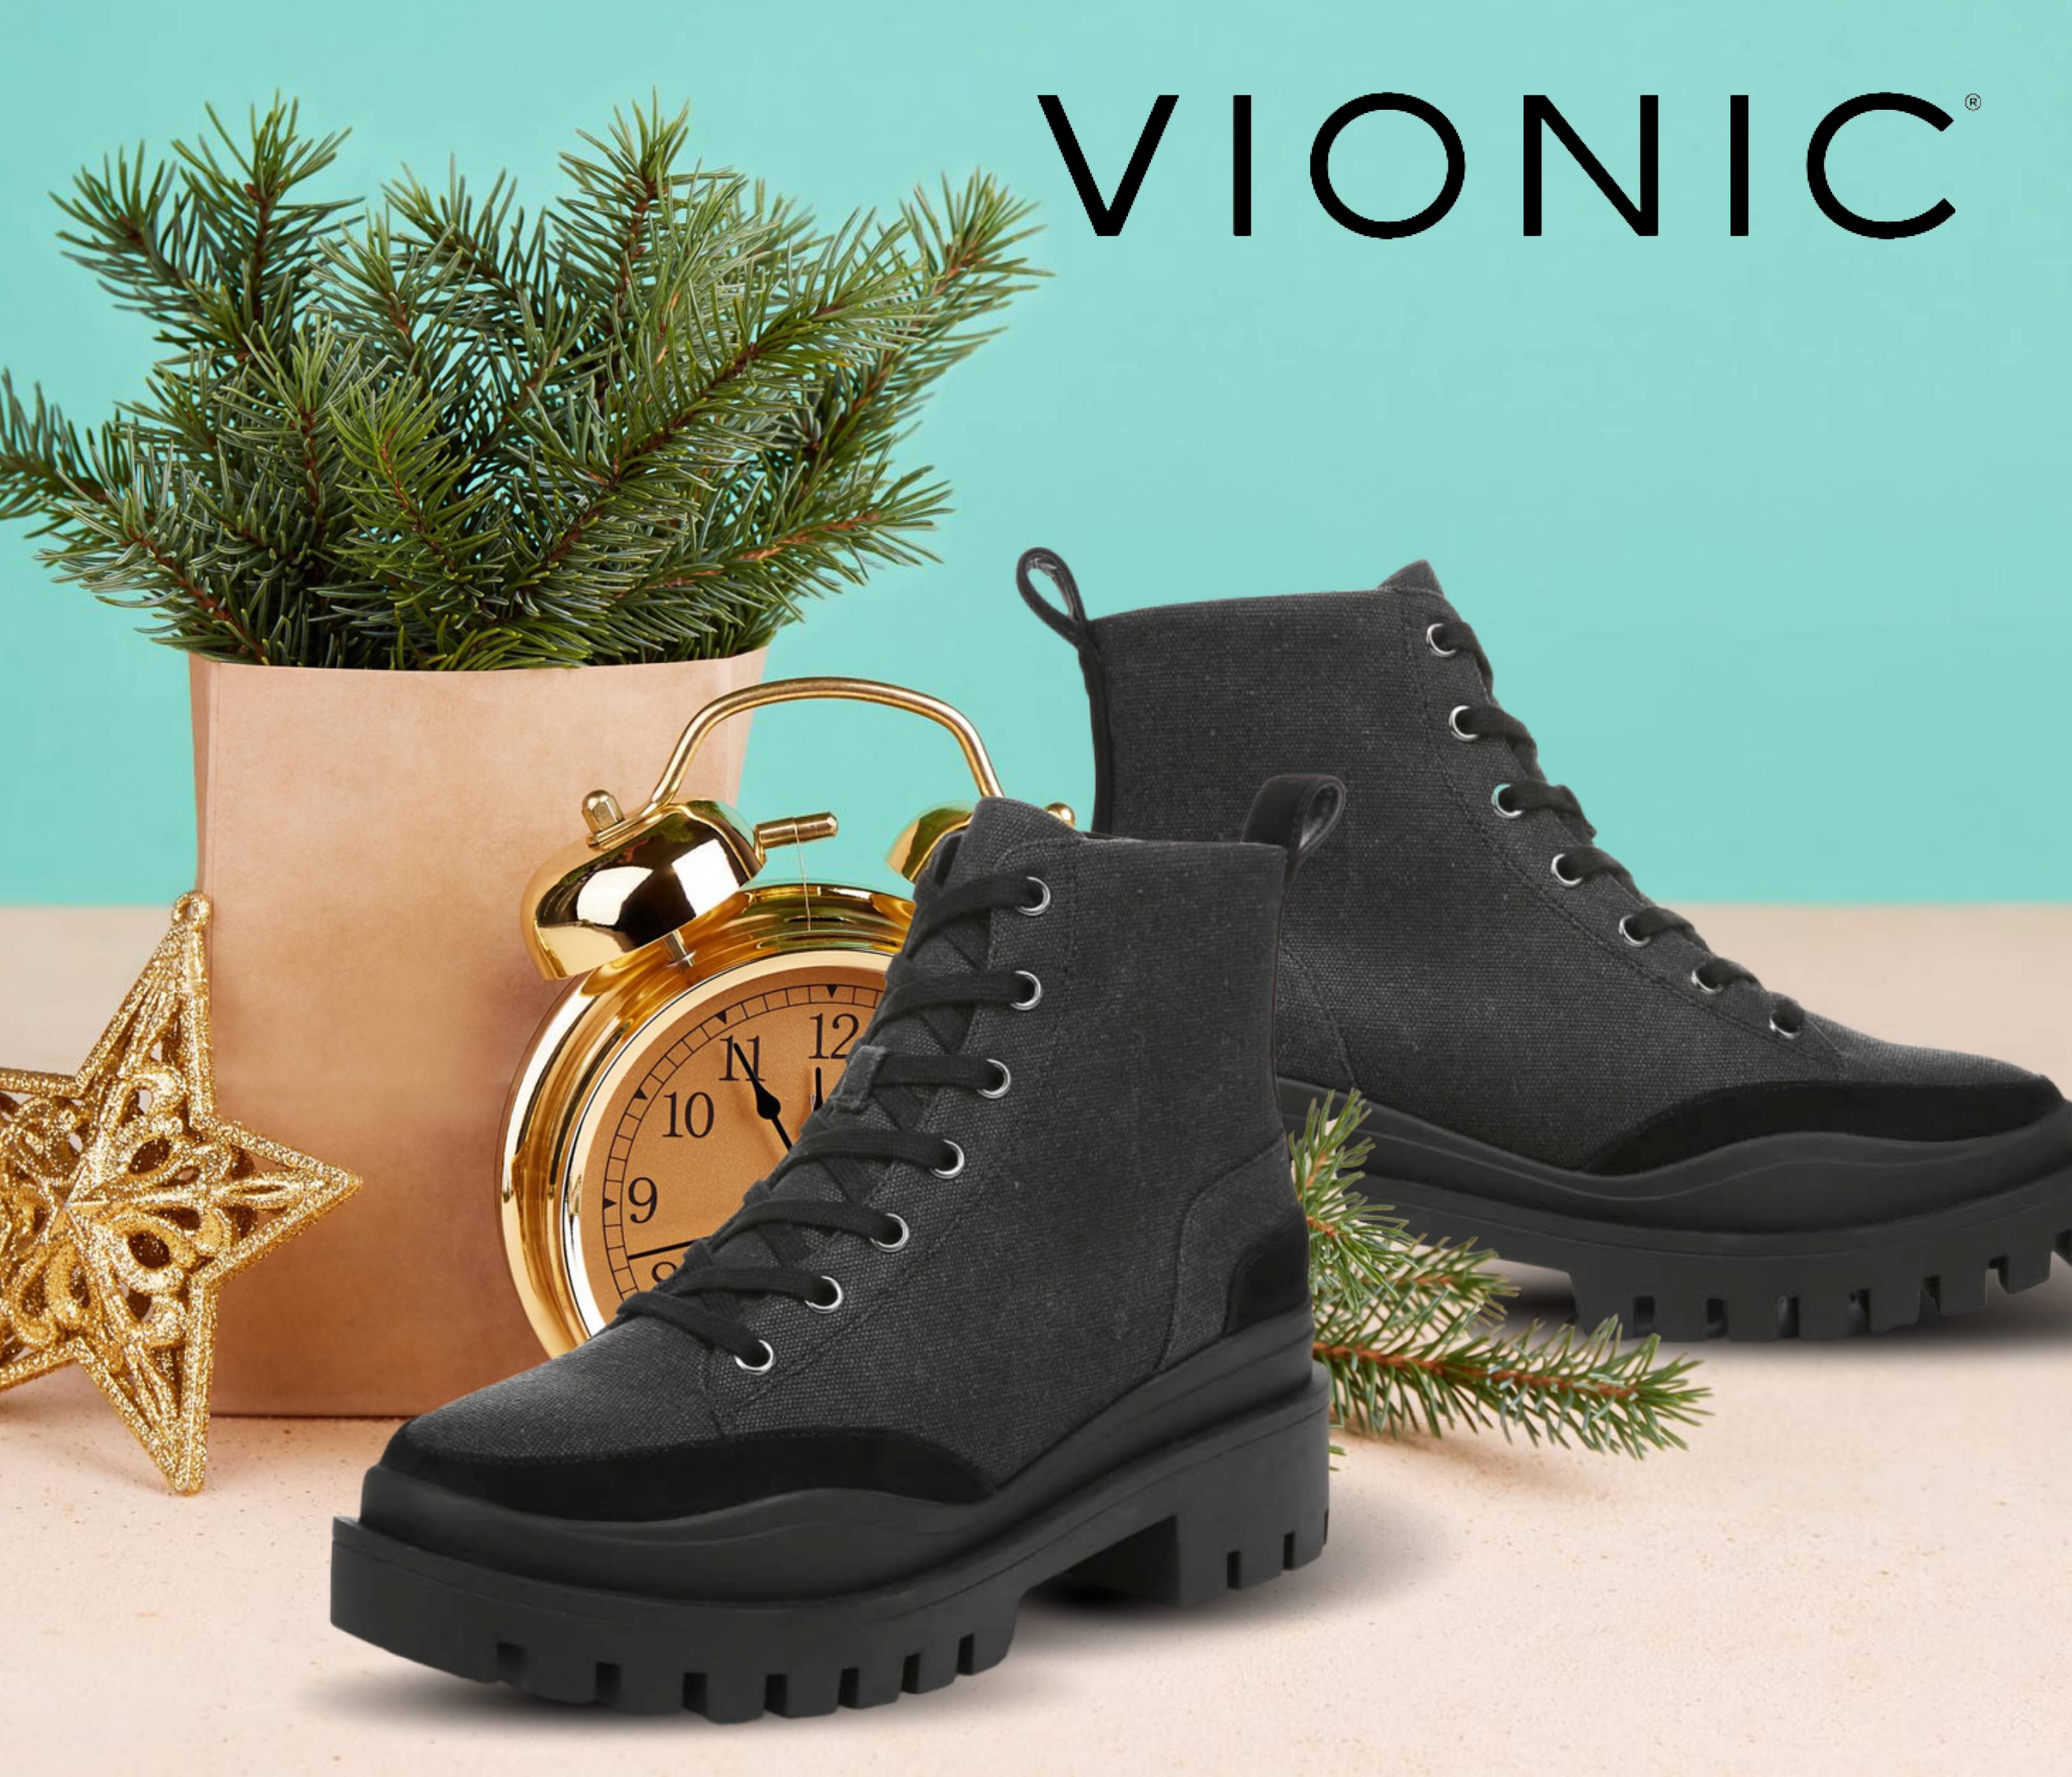 Vionic  Aspen Mellie  Black ~ this is a next-level boot we're crushing on. Blaze a new fashion trail in these must-have beauties!